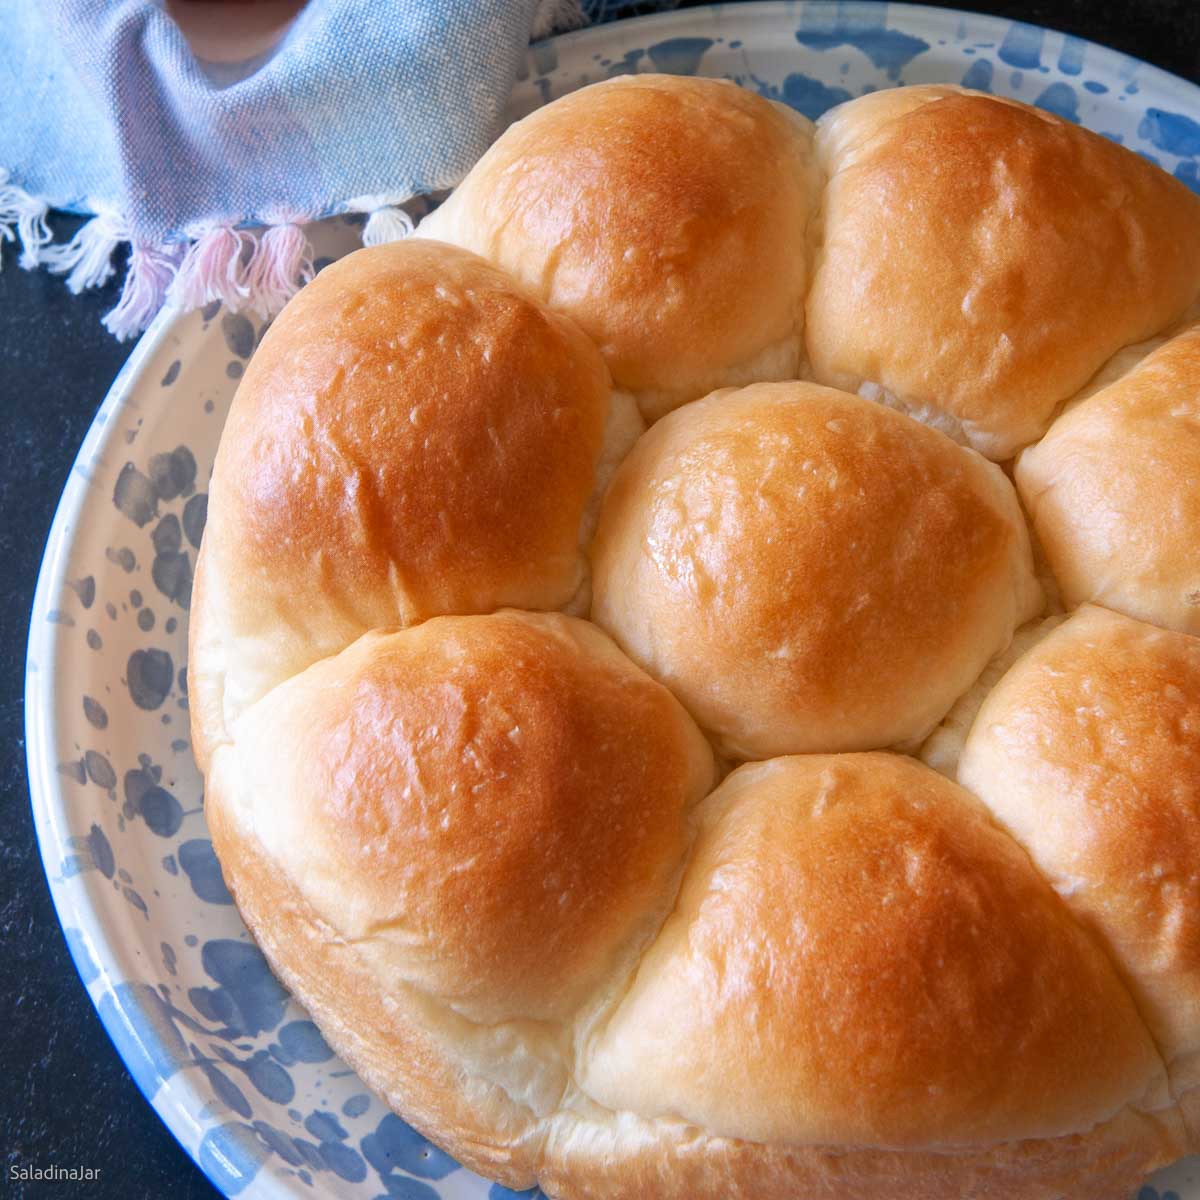 To Bake Better Homemade Bread & Rolls: Use a Thermometer!